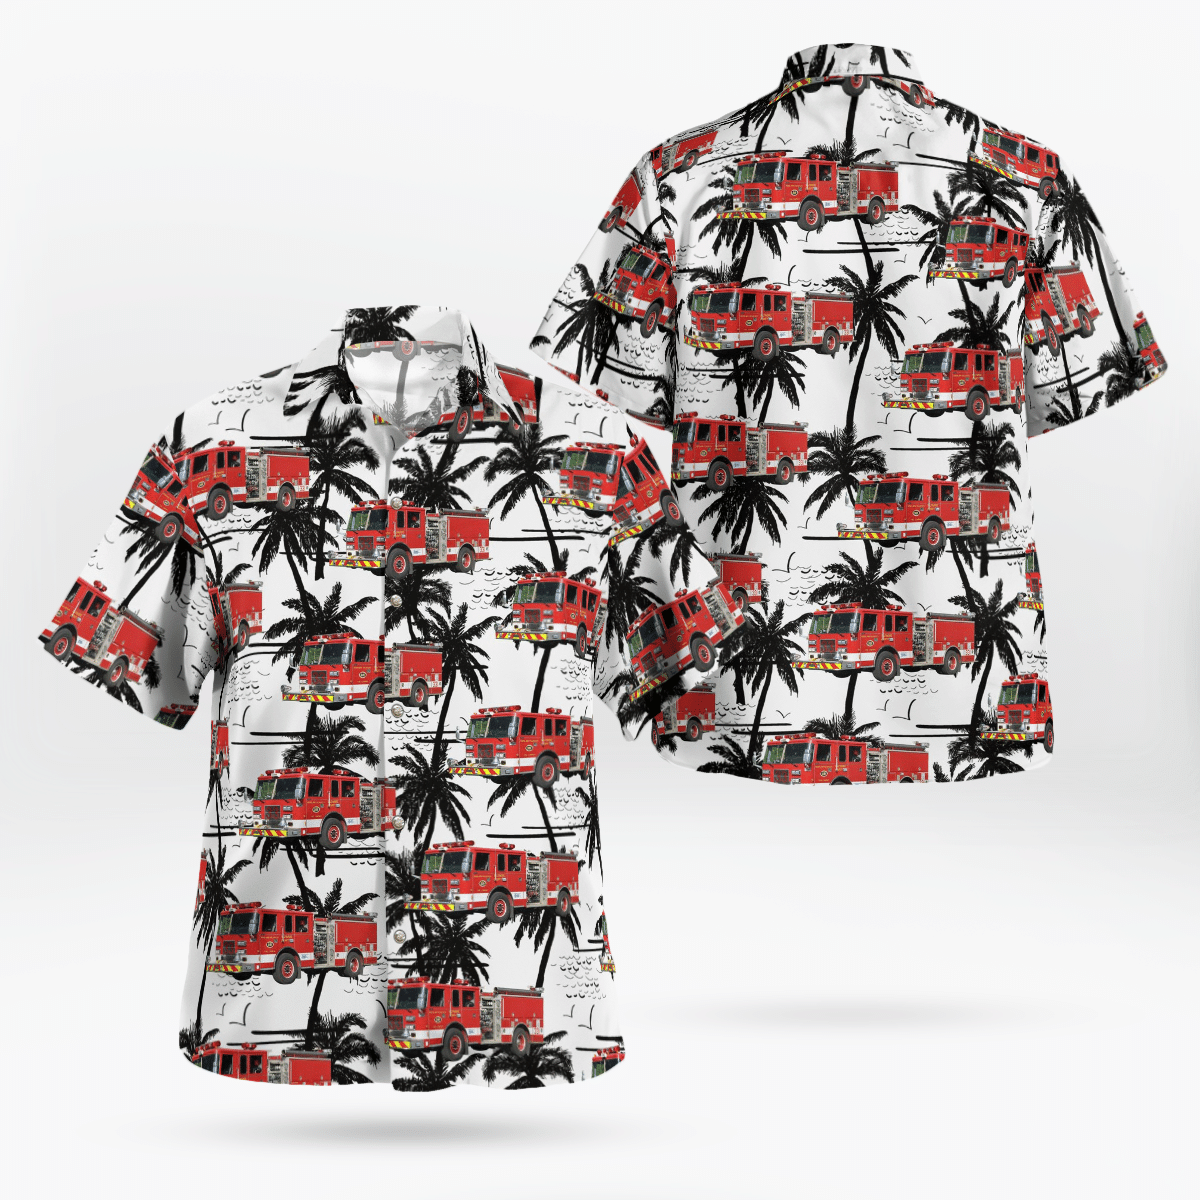 If you are in need of a new summertime look, pick up this Hawaiian shirt 195